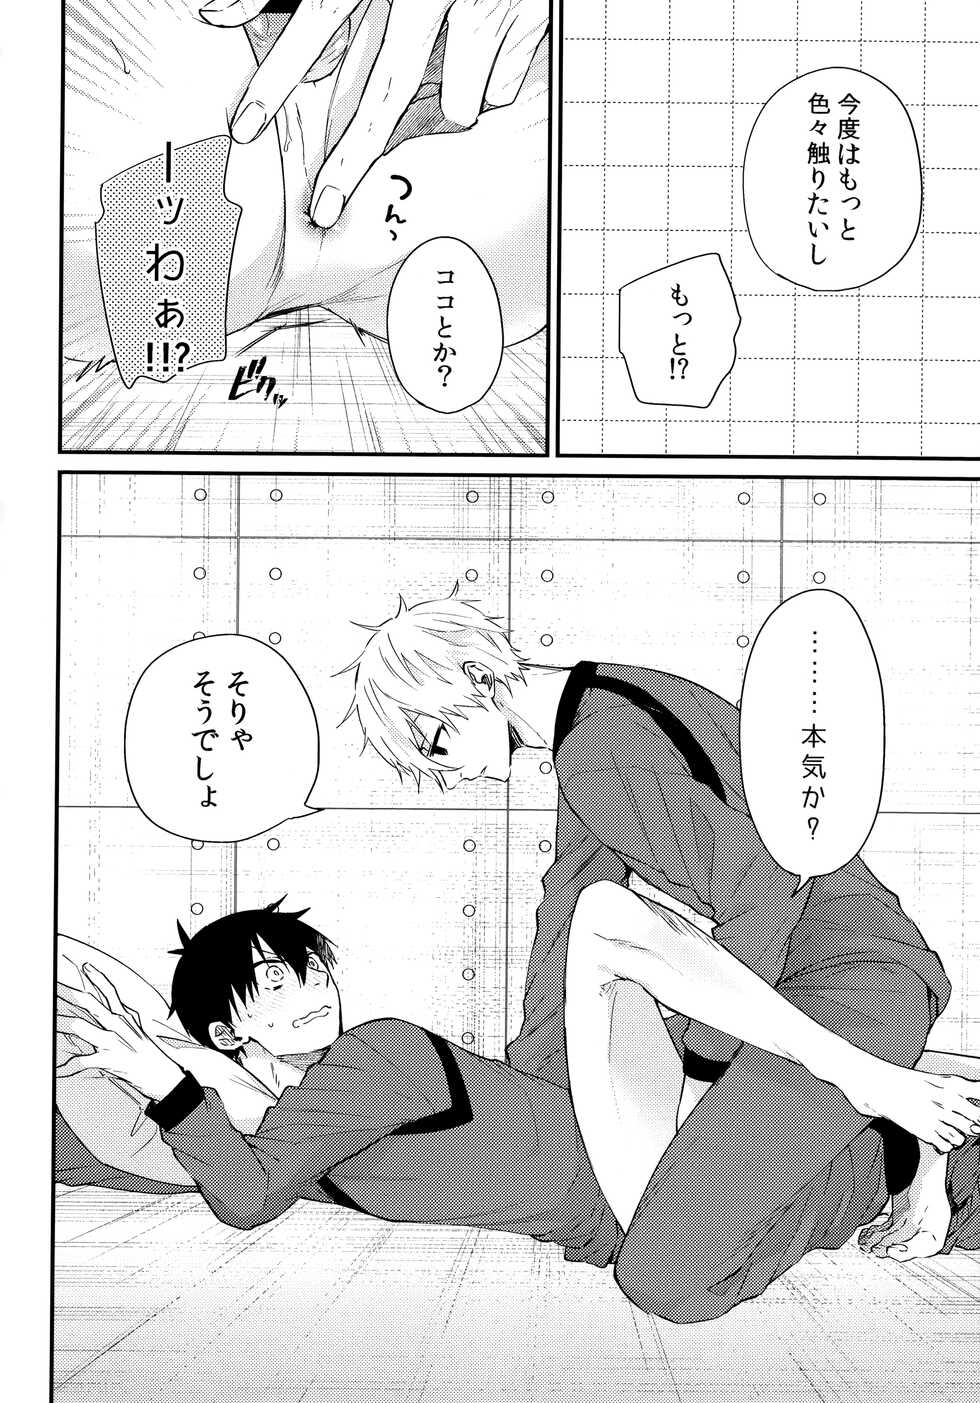 (Seishun Egoism 2) [RoLOCK (Ichi)] Motto Sawaritai - I want to touch and more (Blue Lock) - Page 21